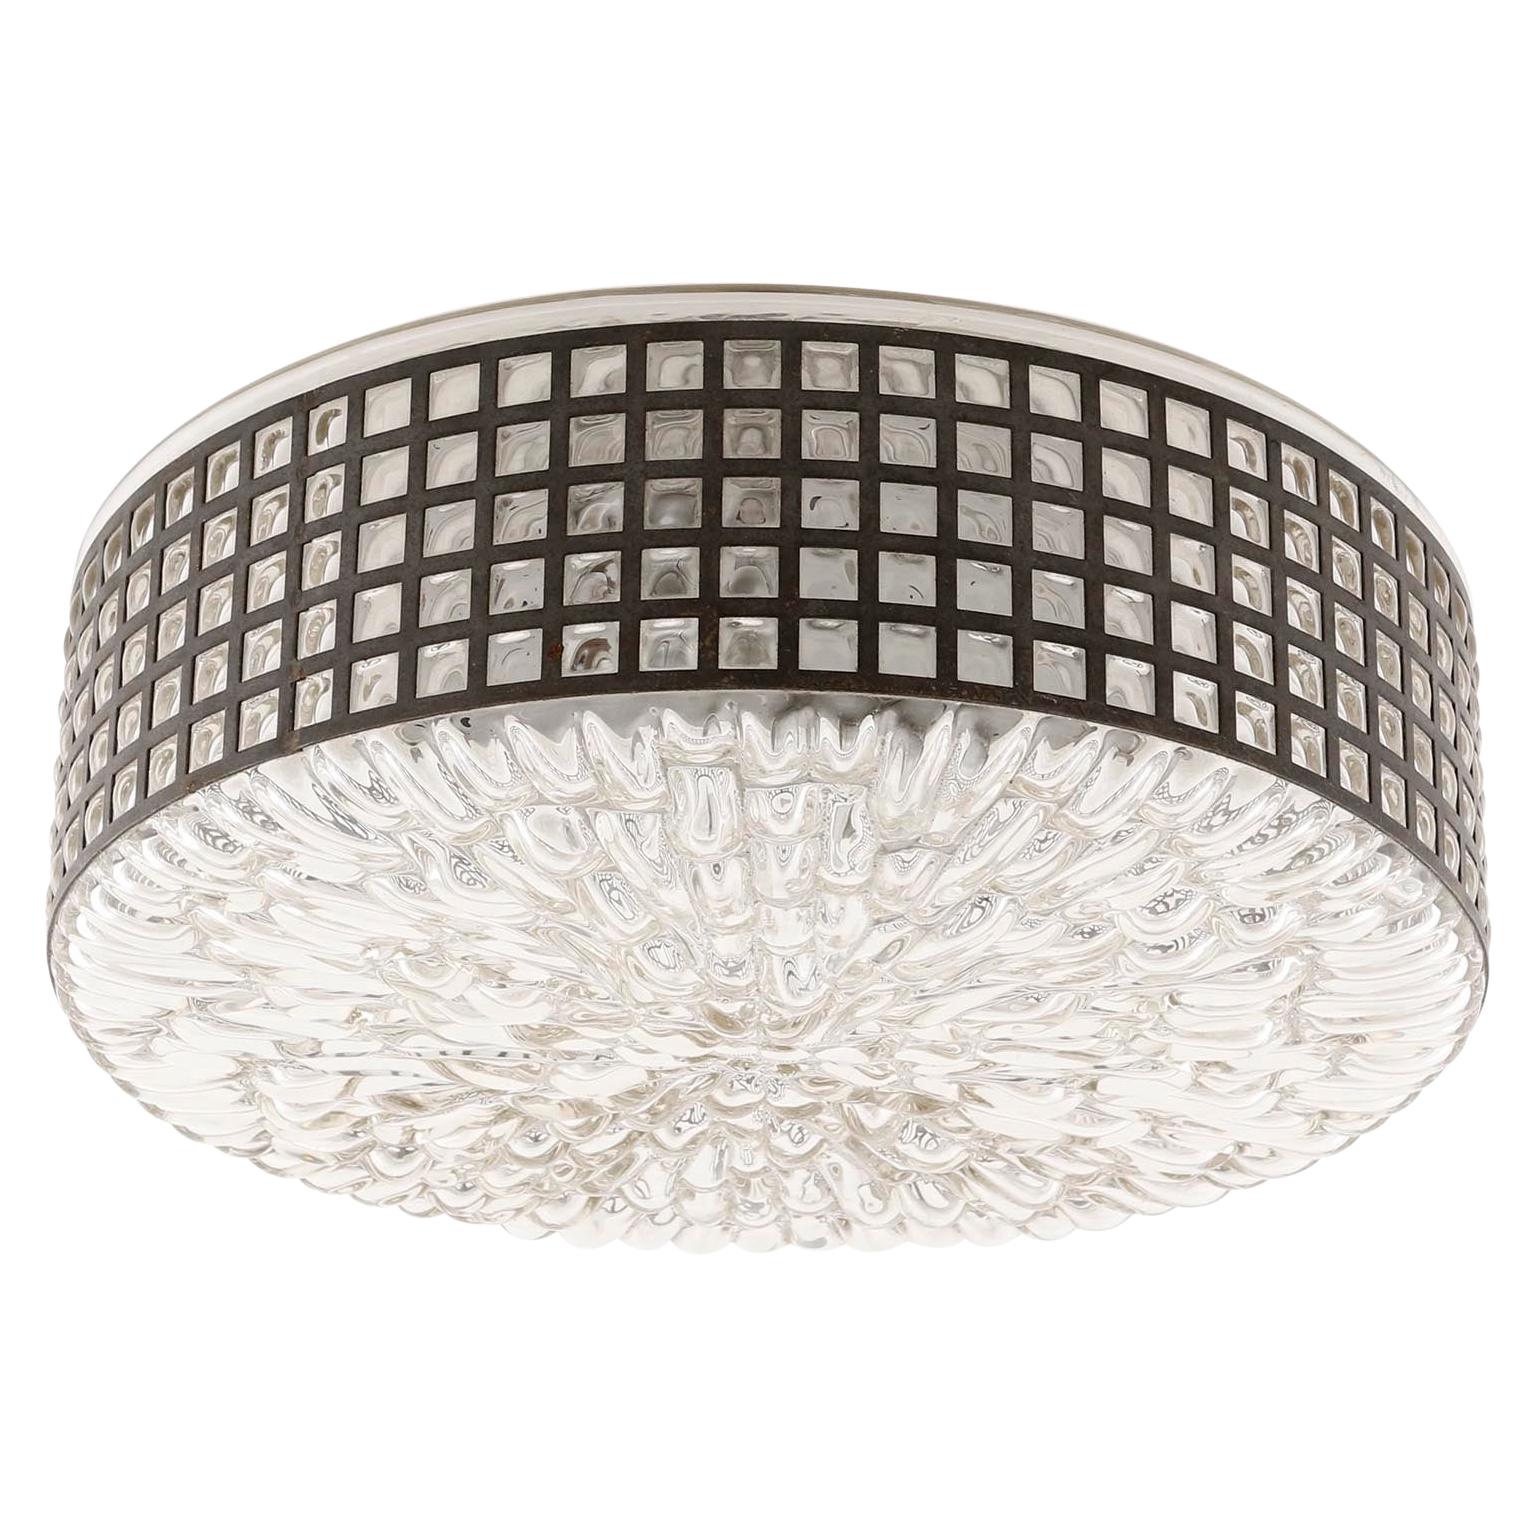 One of two fantastic textured glass light fixtures by Rupert Nikoll, Austria, Vienna, manufactured in midcentury, circa 1950s-1960s.
They can be used as ceiling or wall lamps.
The glass has been hand blown throw a perforated round metal belt which